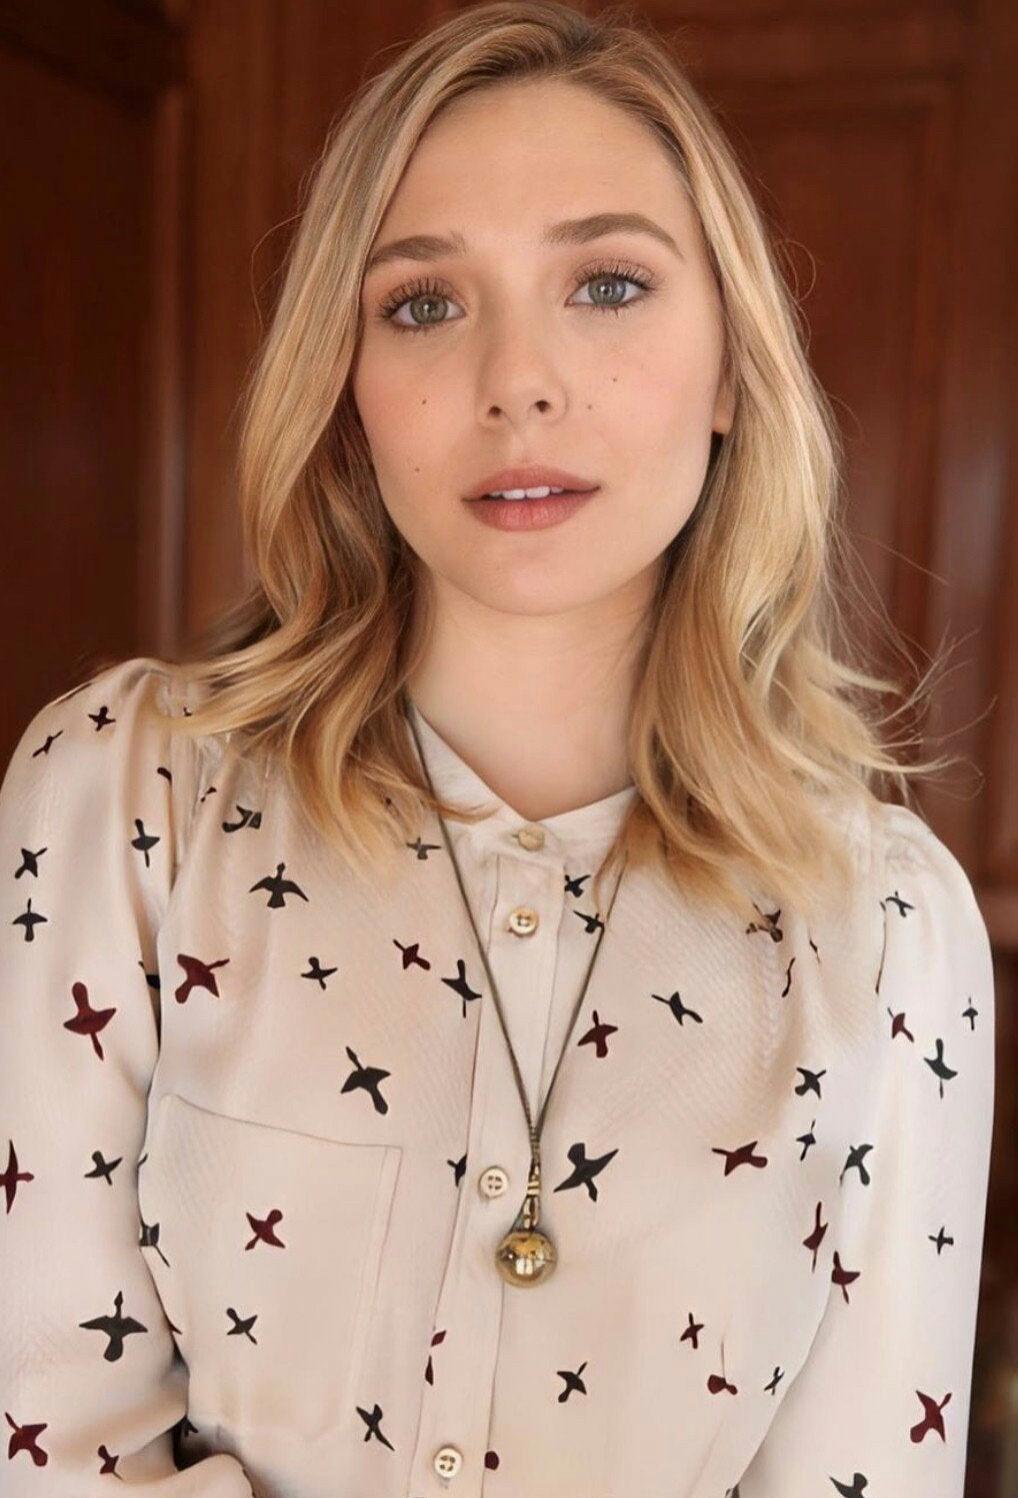 No need to act so innocent and proper, Elizabeth Olsen. We all know that you're a horny little girl in need of cock.